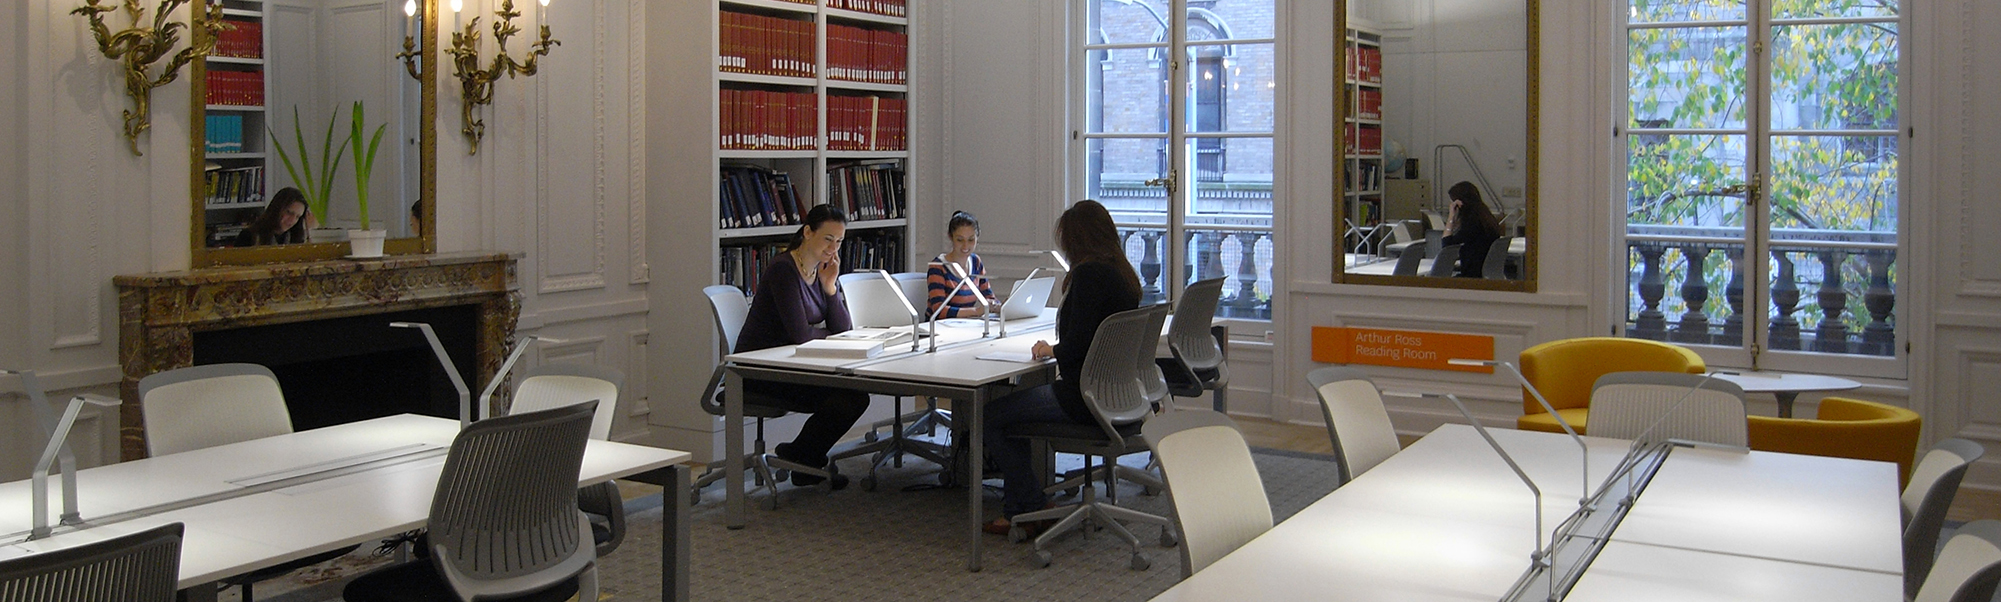 A clean white room with ornate gold sconces, a large mirror and fireplace, new white desks and rolling chairs, bookshelf and large windows. Three women sit at one of the tables, with books out, chatting.